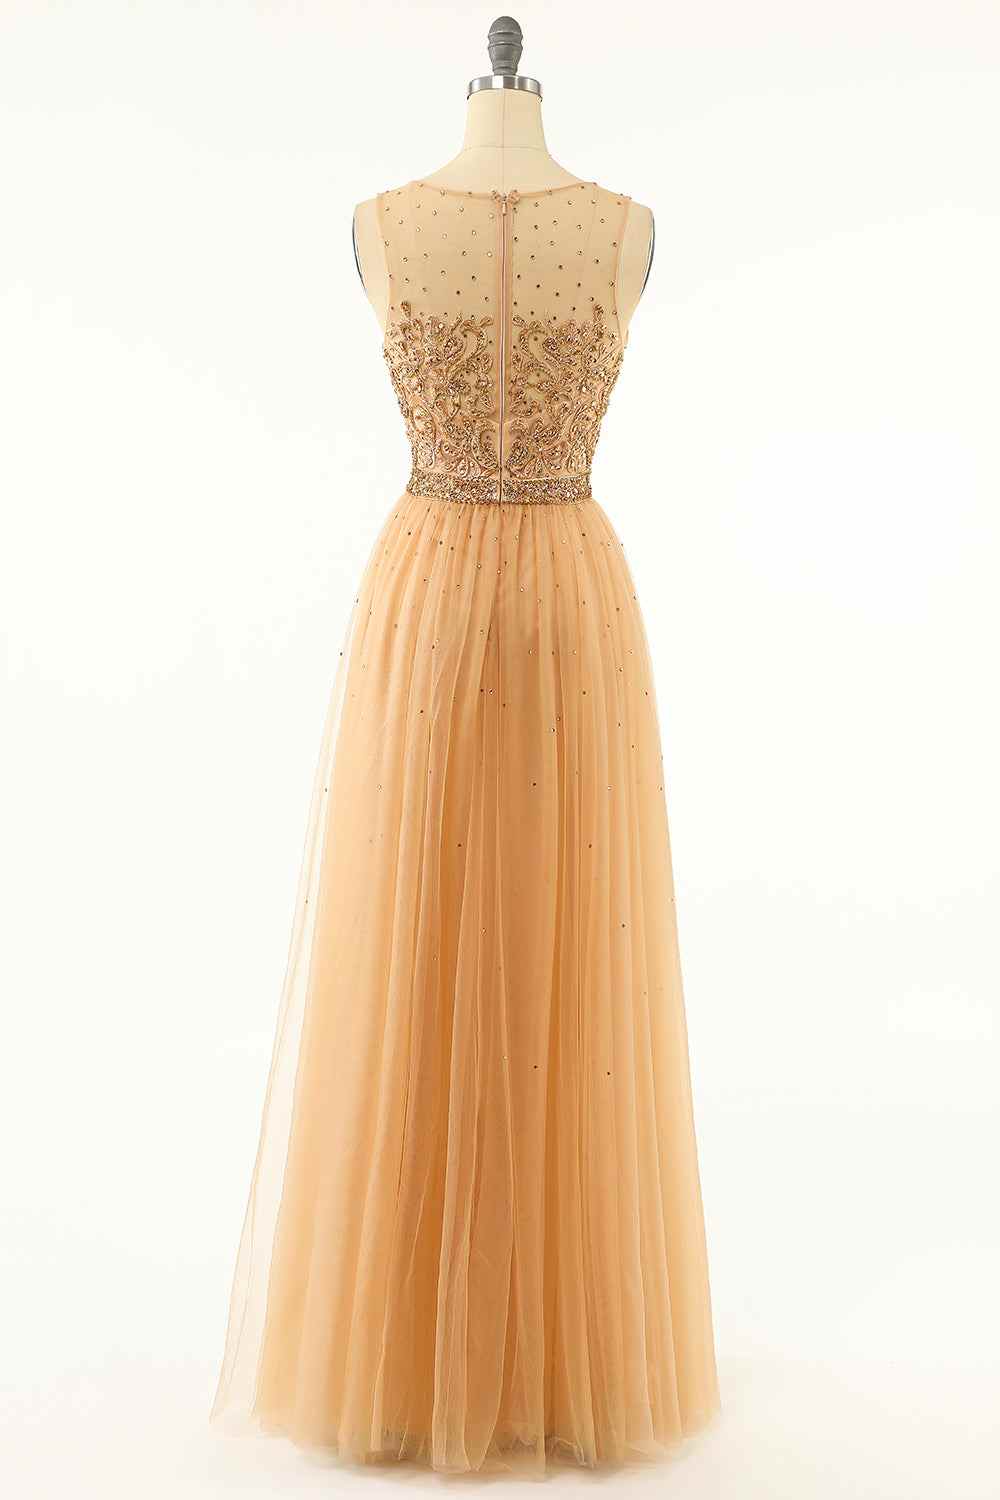 Gold A-line Illusion Neckline Sparkly Tulle Embroidery Long Prom Dress